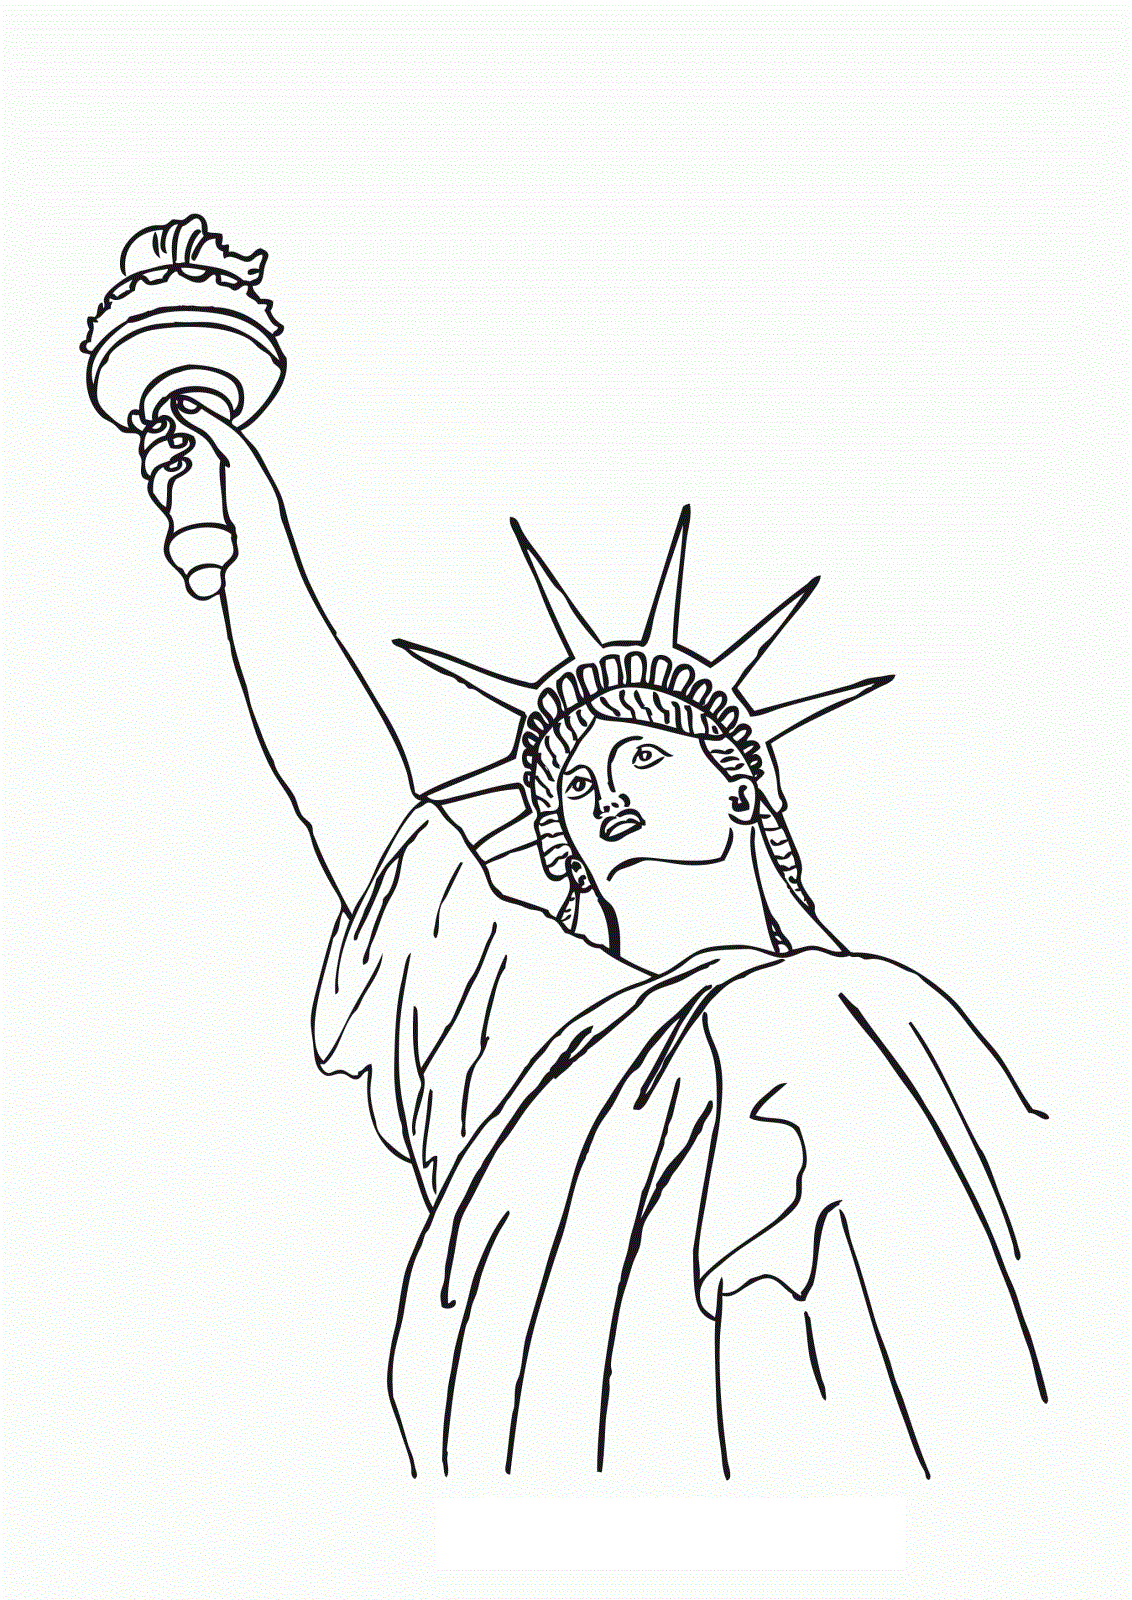 Free Printable Statue of Liberty Coloring Pages For Kids